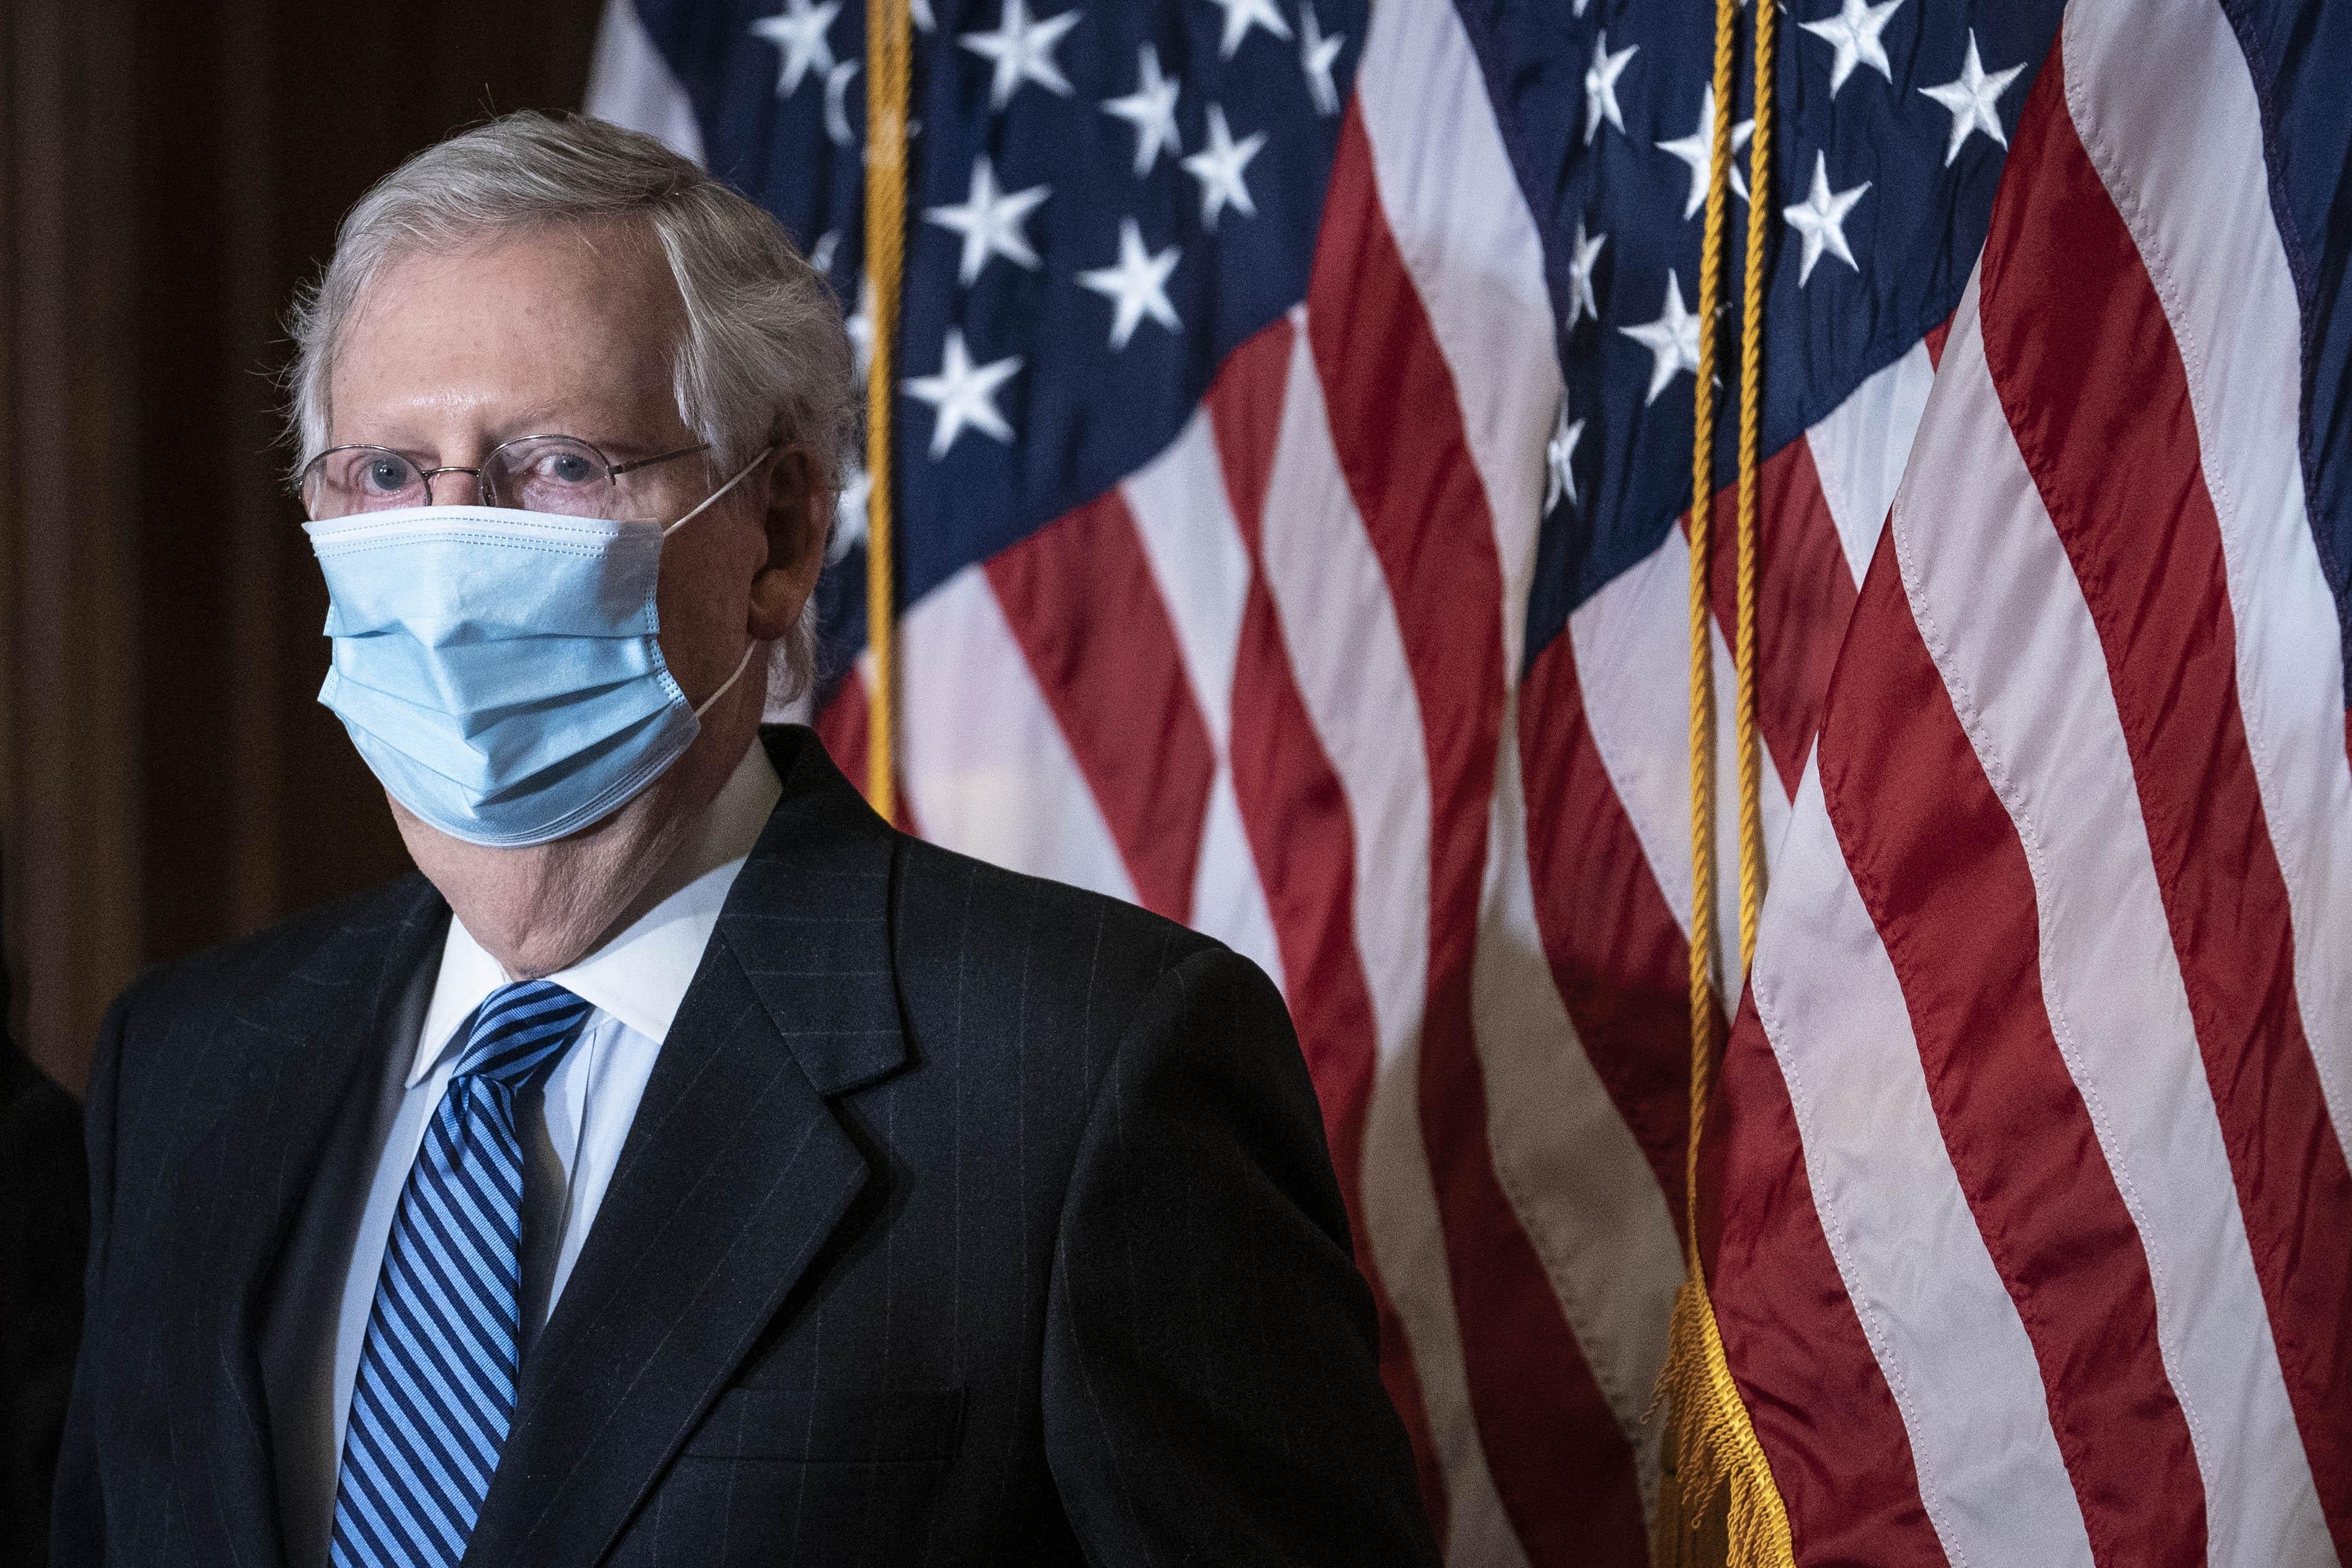 Mitch McConnell is seen wearing a face mask while standing front of U.S. flags.